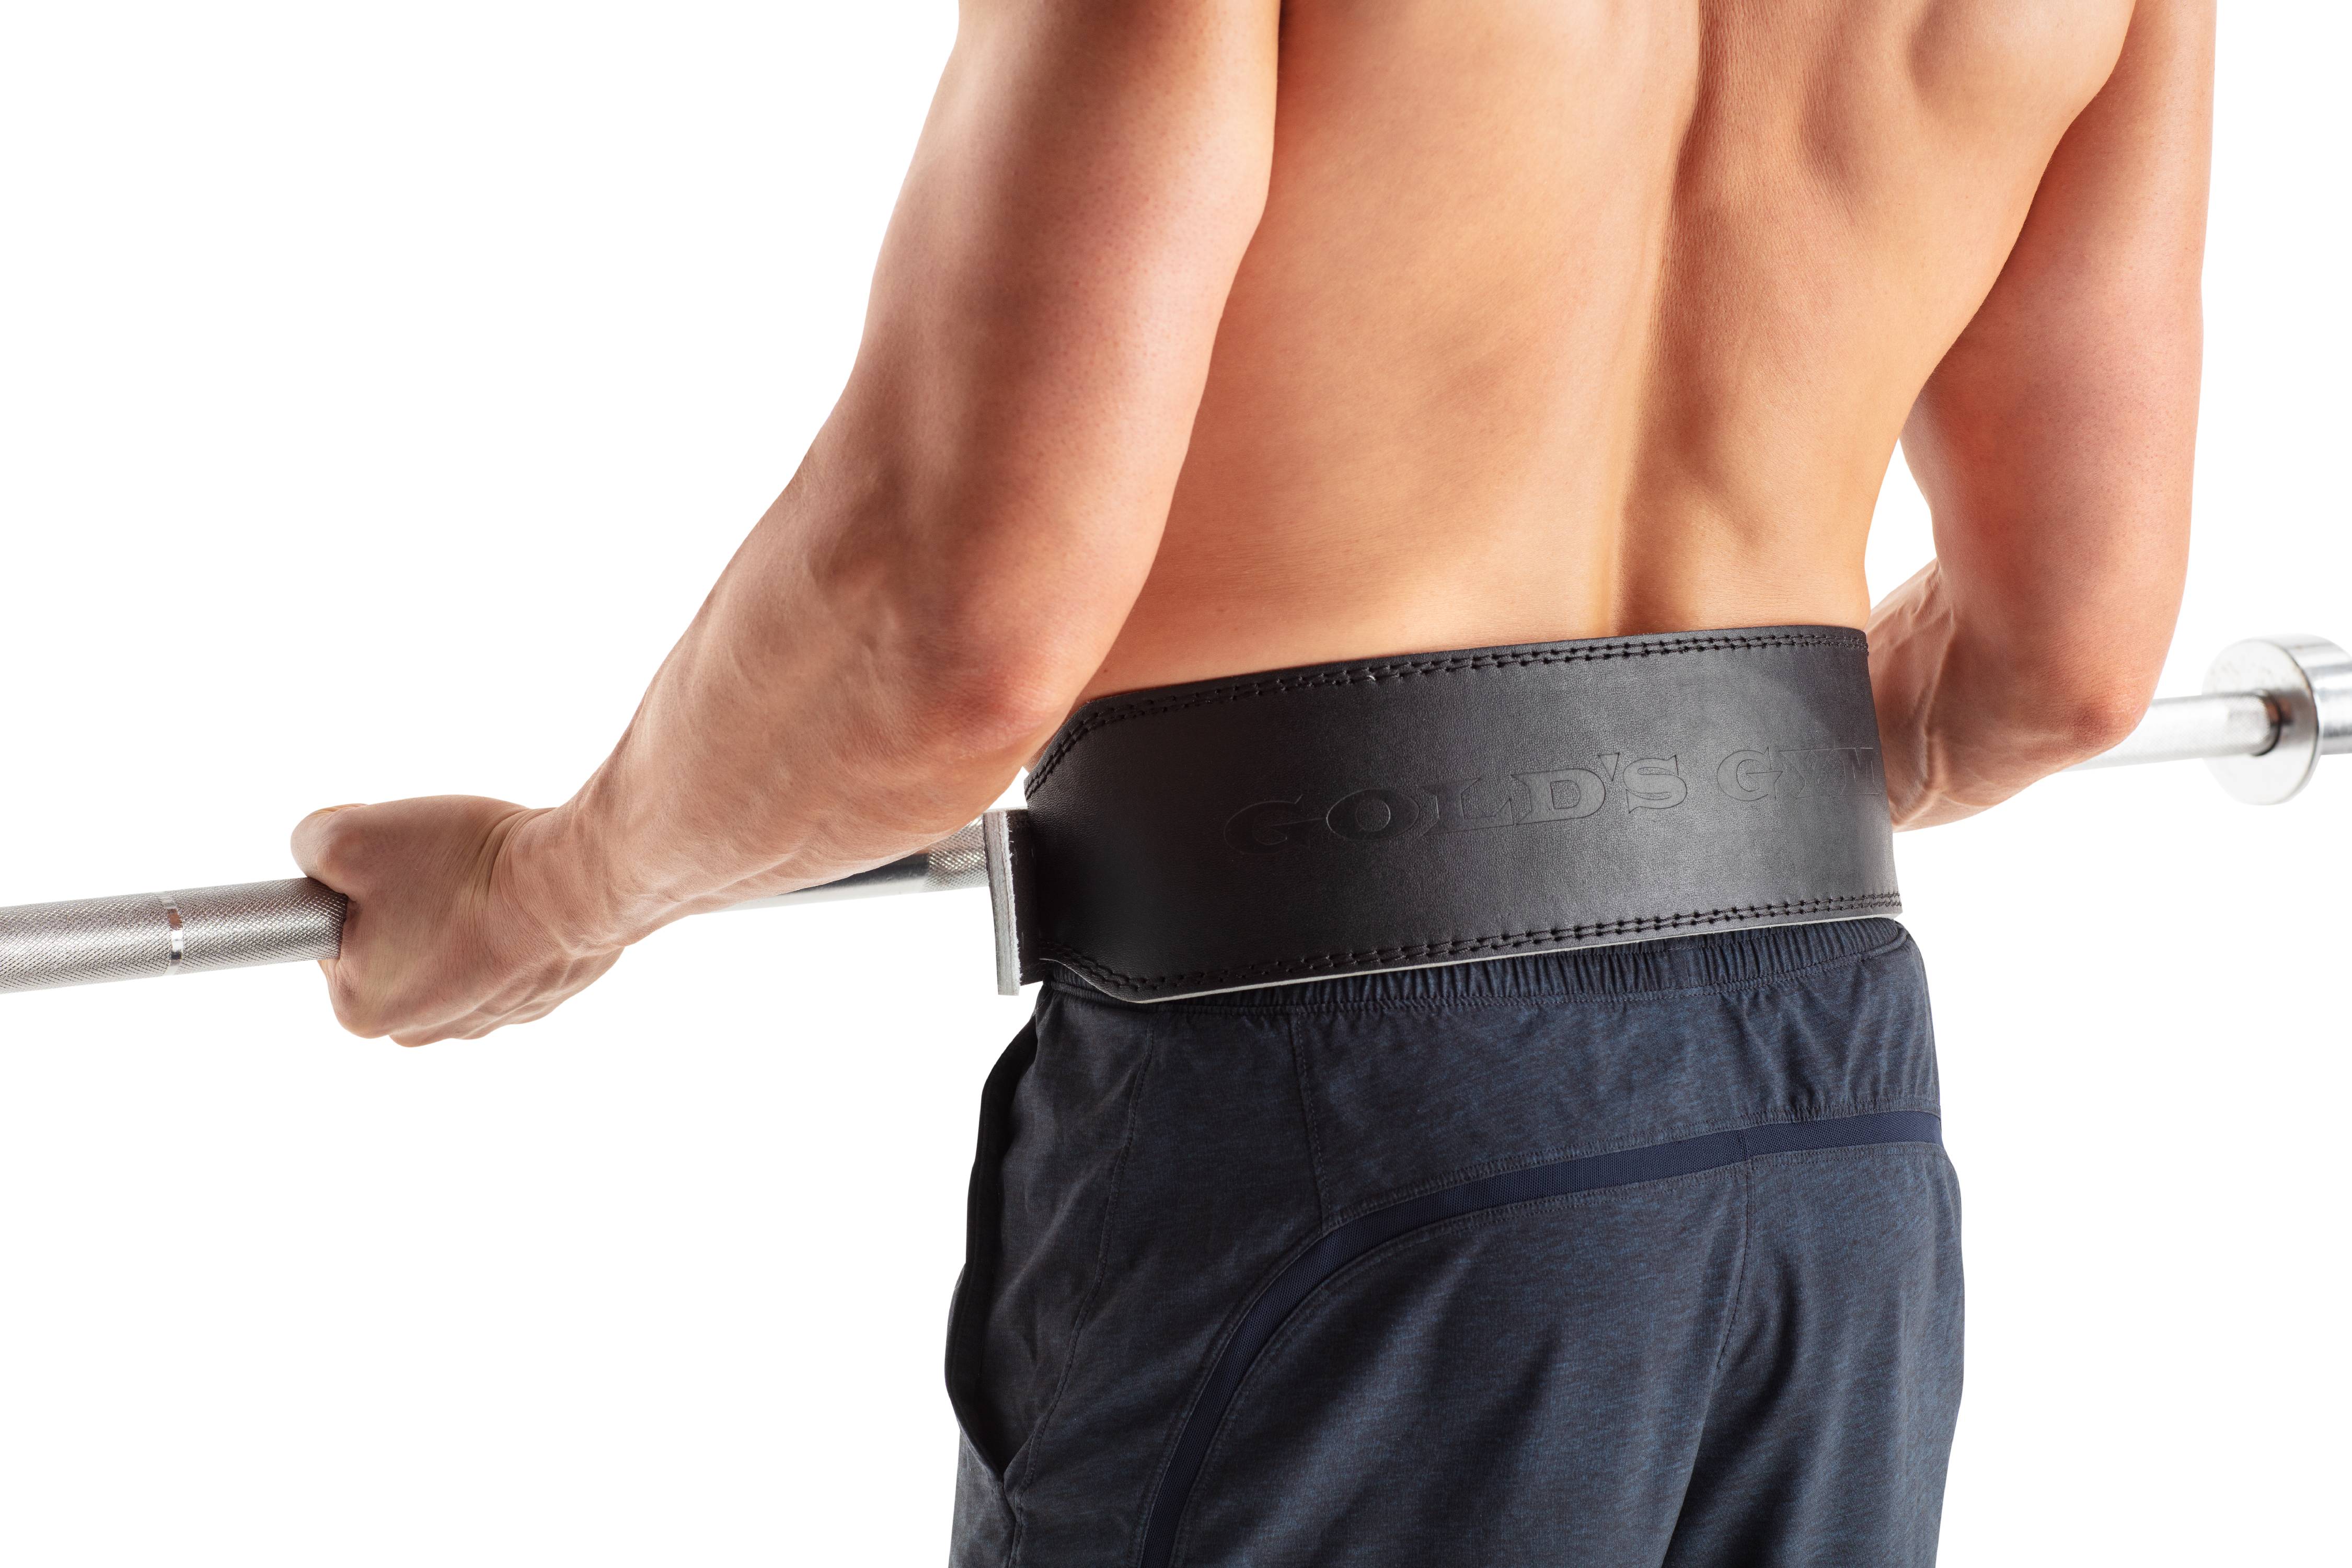 Gold's Gym Leather Weight Lifting Belt with Padded Back Support - image 5 of 5